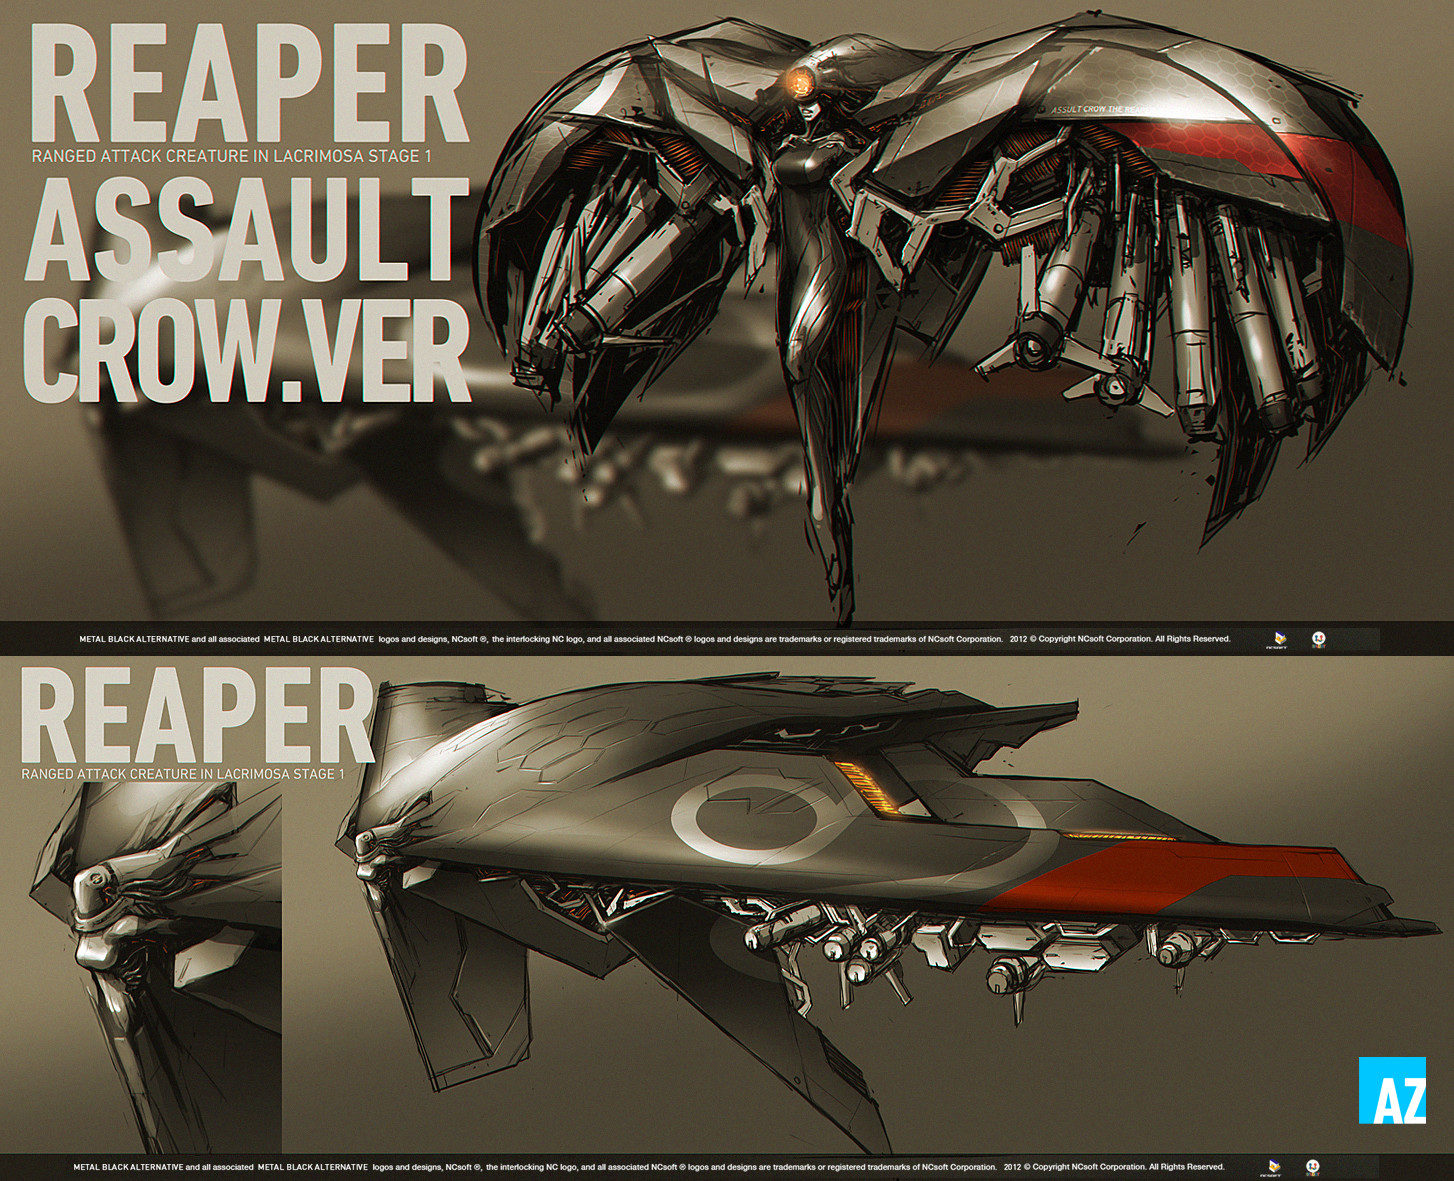 First concept art about "REAPER"